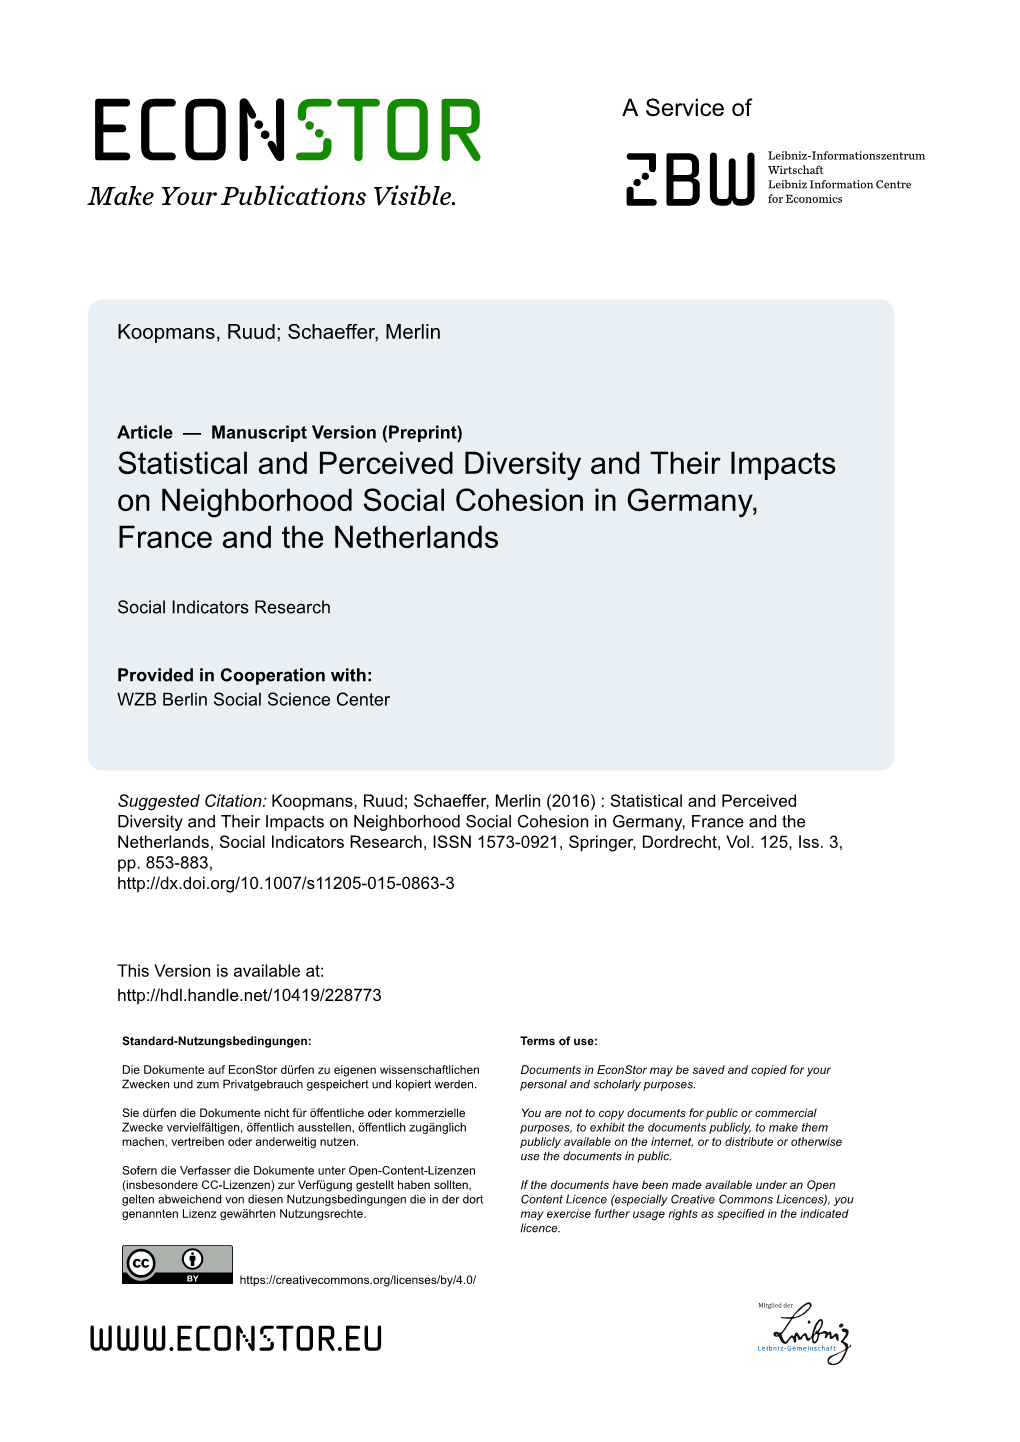 Statistical and Perceived Diversity and Their Impacts on Neighborhood Social Cohesion in Germany, France and the Netherlands